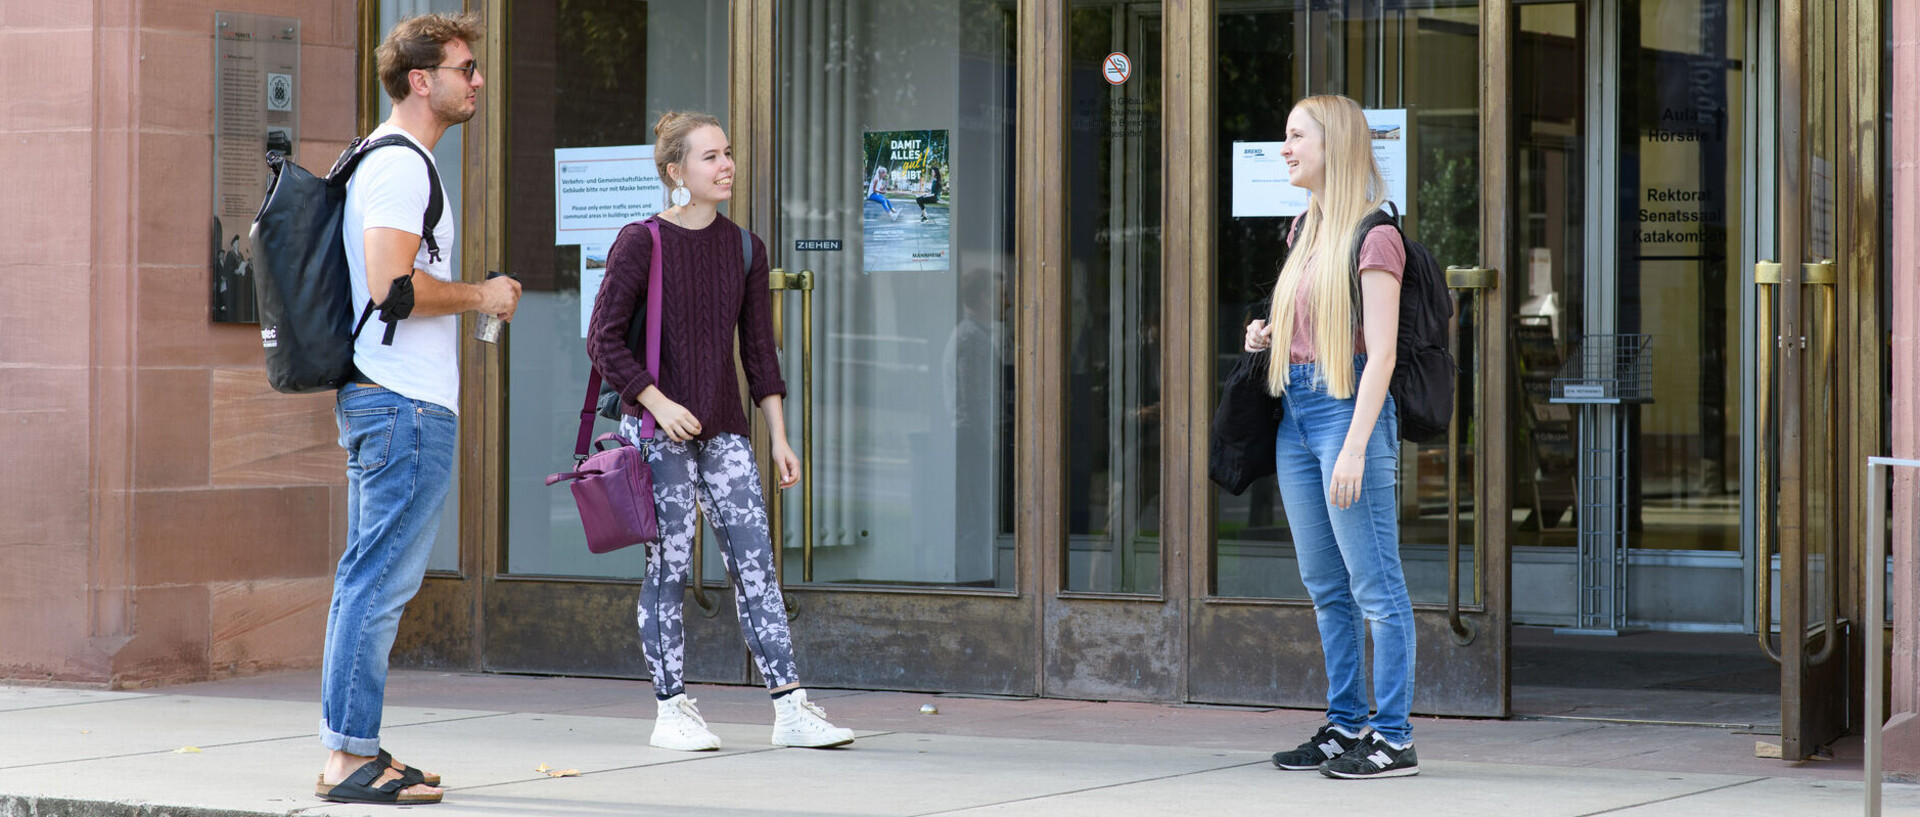 Three students stand about 1.5 meters apart in front of the main entrance to the University of Mannheim and talk to each other.